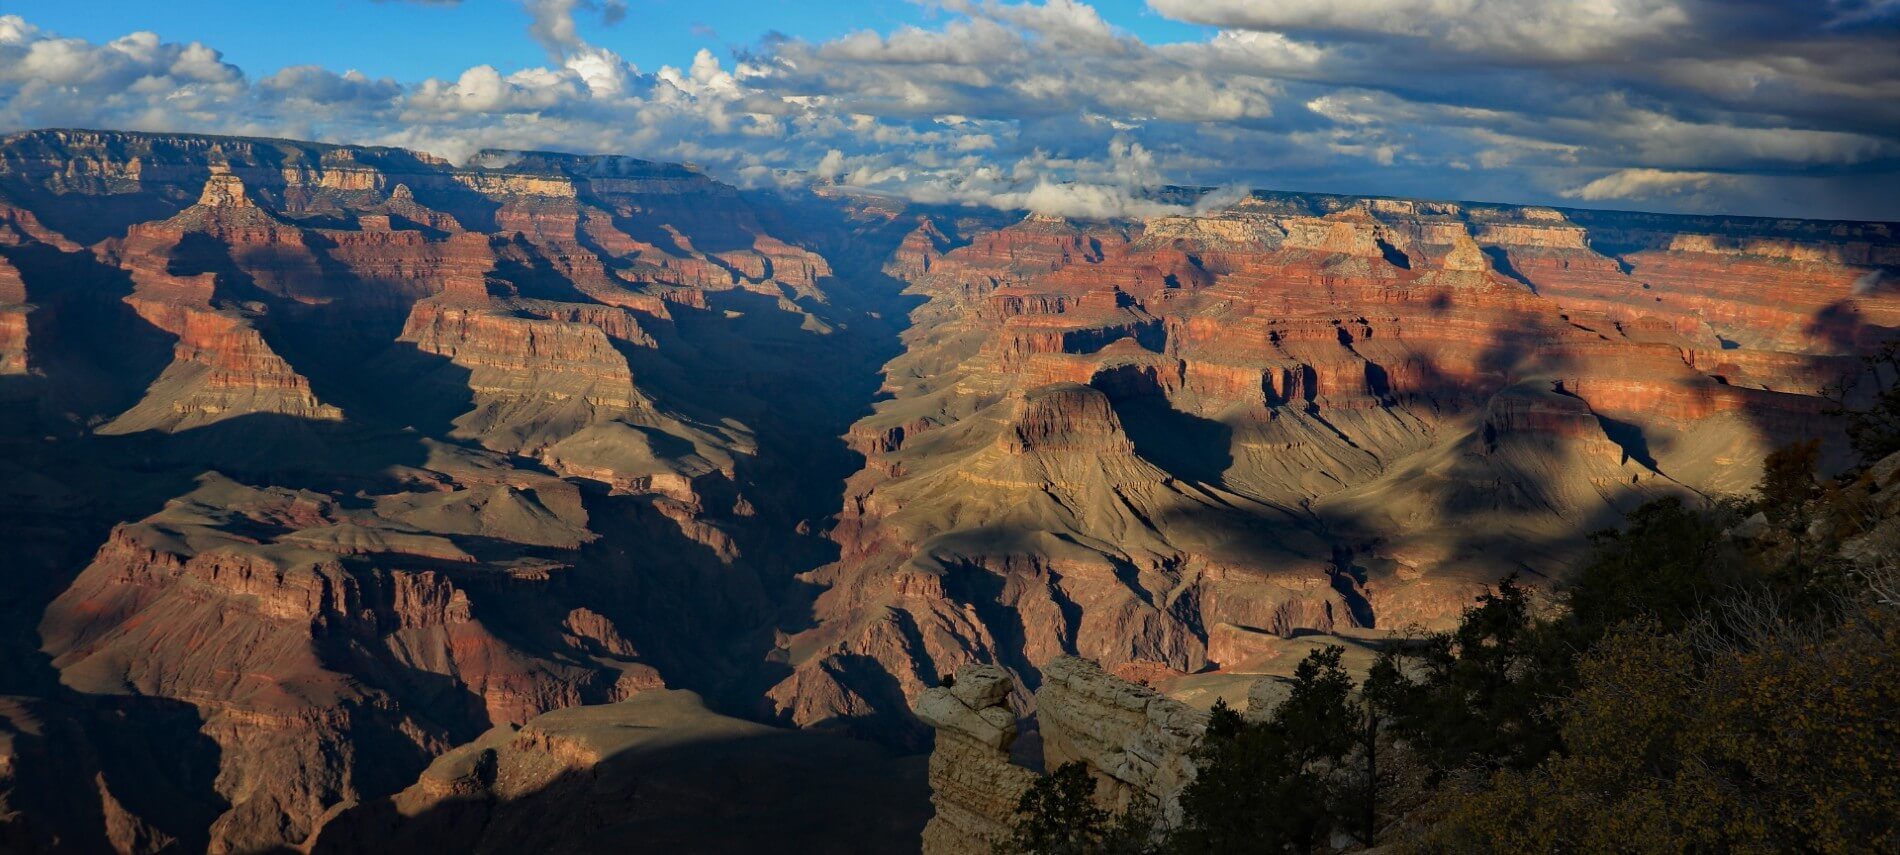 Grand Canyon view at sunset - rocks turning red and yellow with large shadows and blue sky